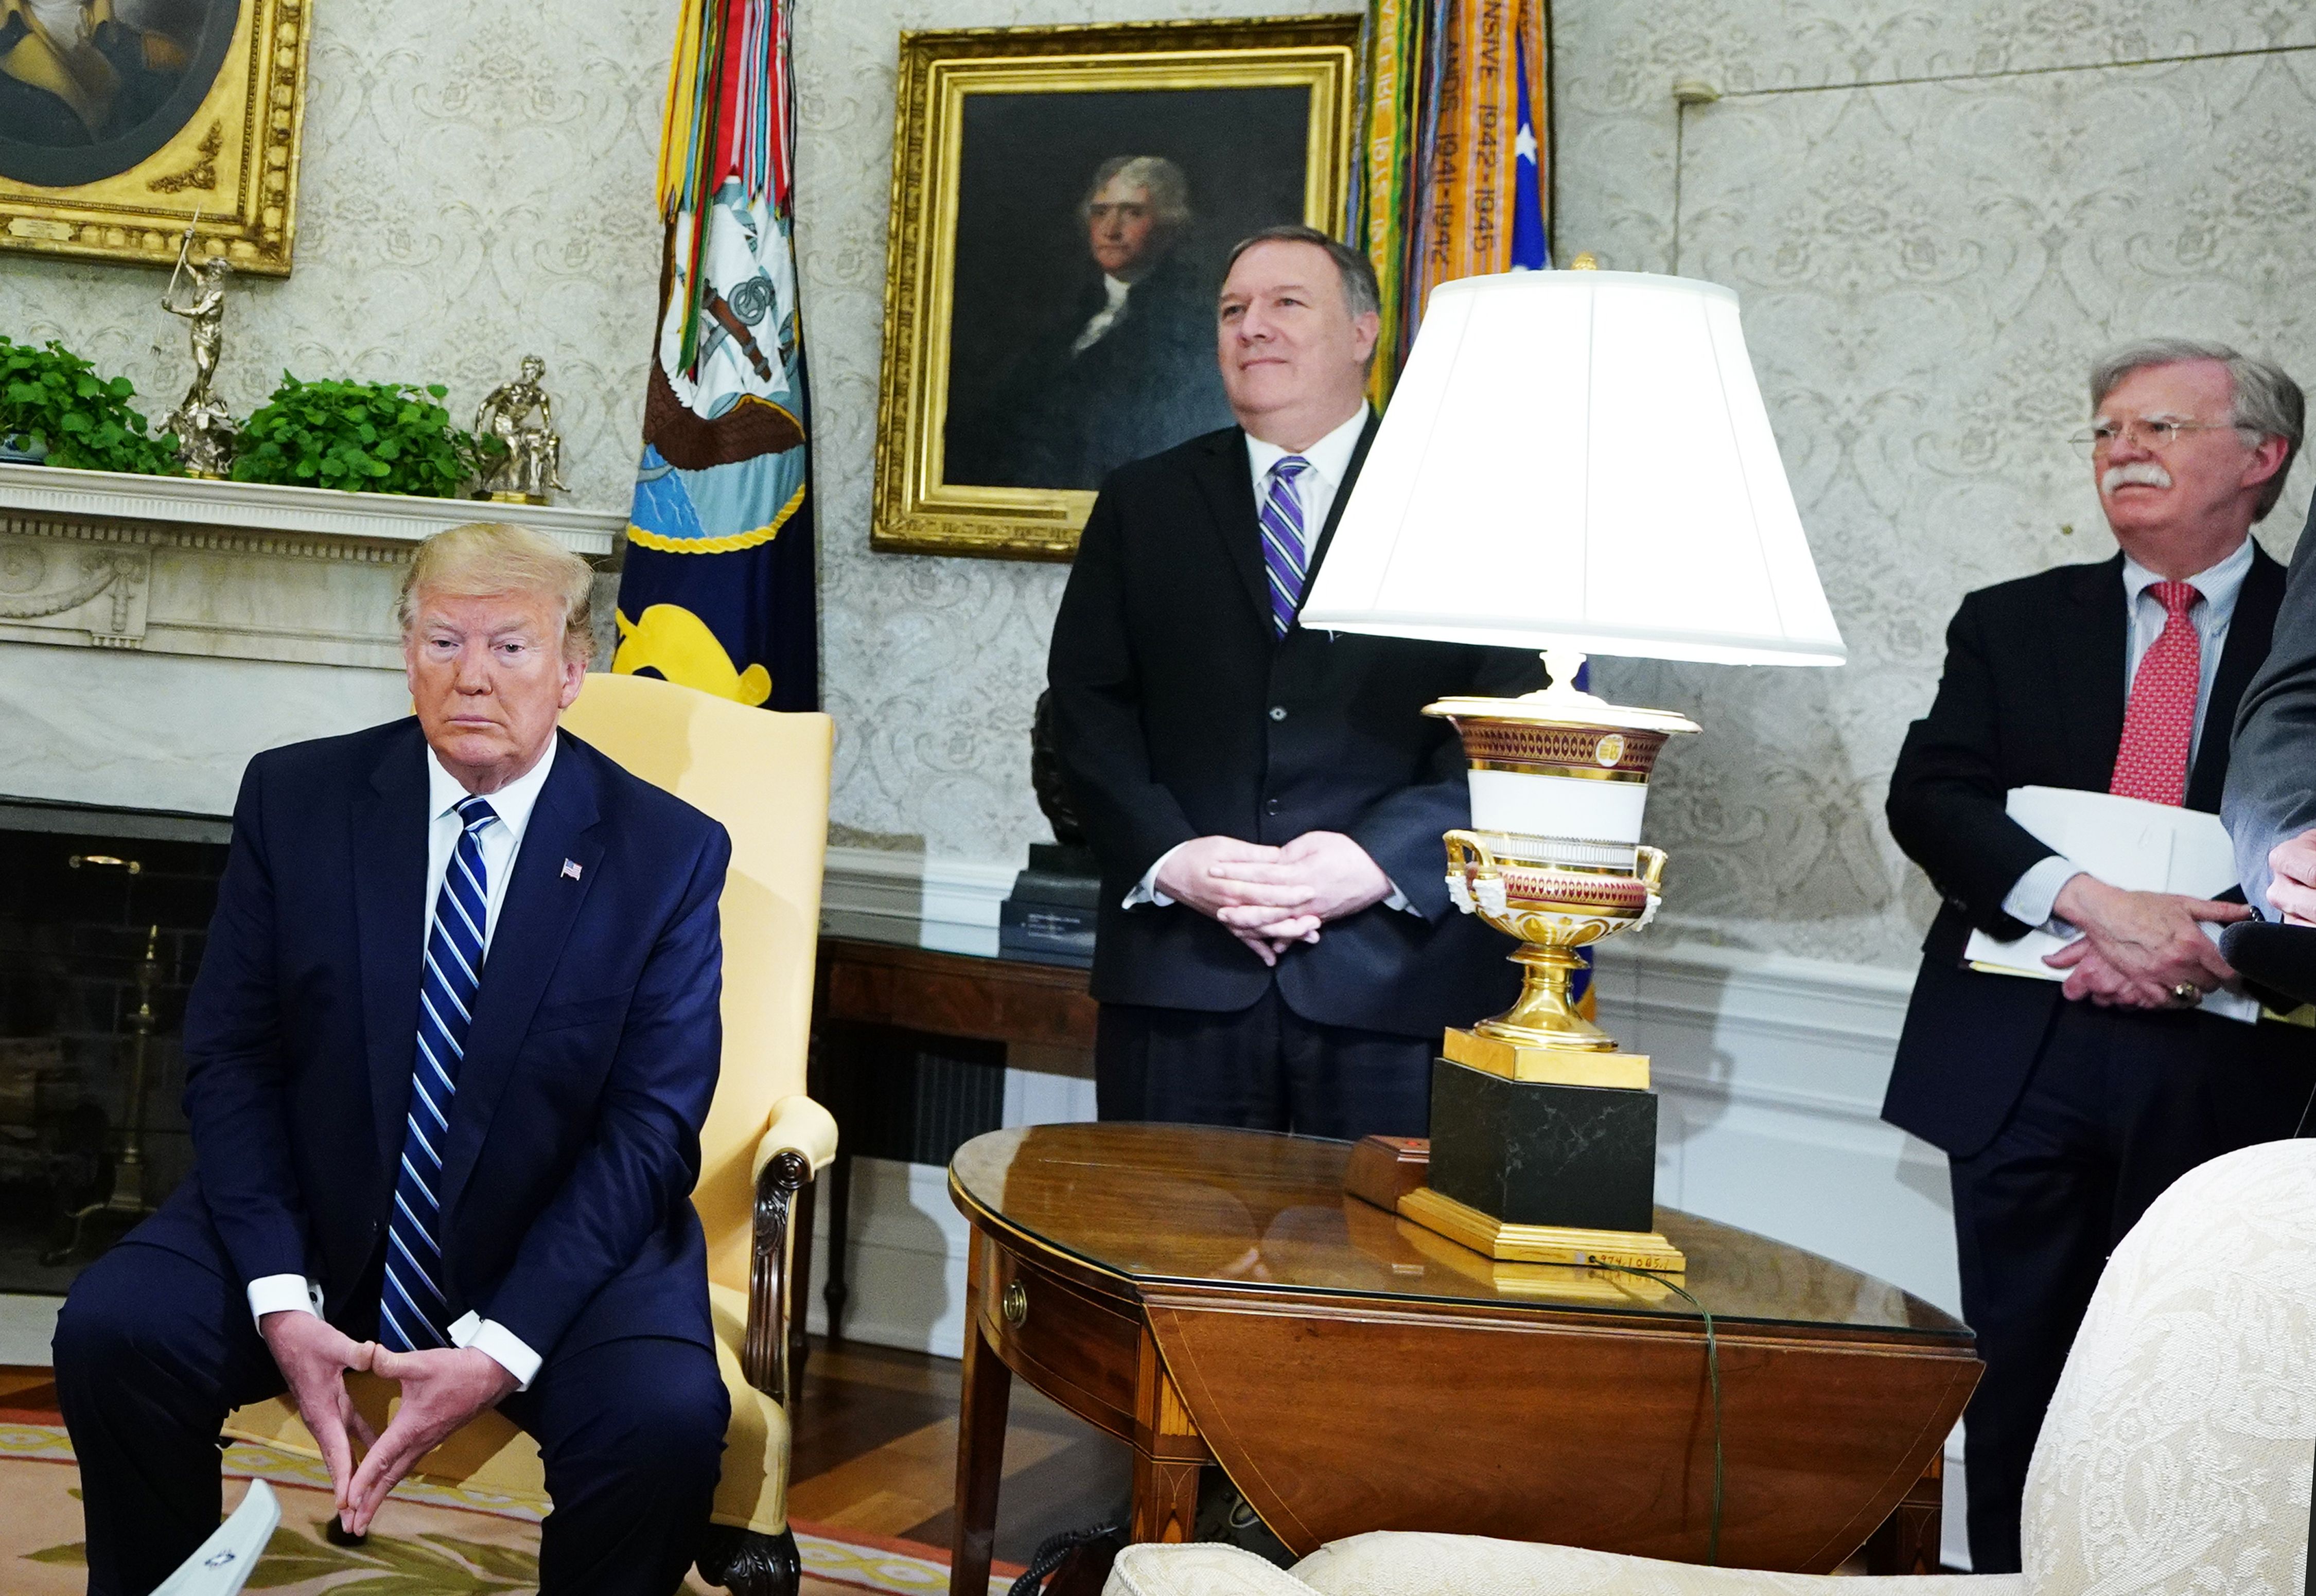 President Trump, Secretary of State Mike Pompeo, and national security adviser John Bolton are seen during a bilateral meeting with Canada's Prime Minister Justin Trudeau in the Oval Office on June 20, 2019.